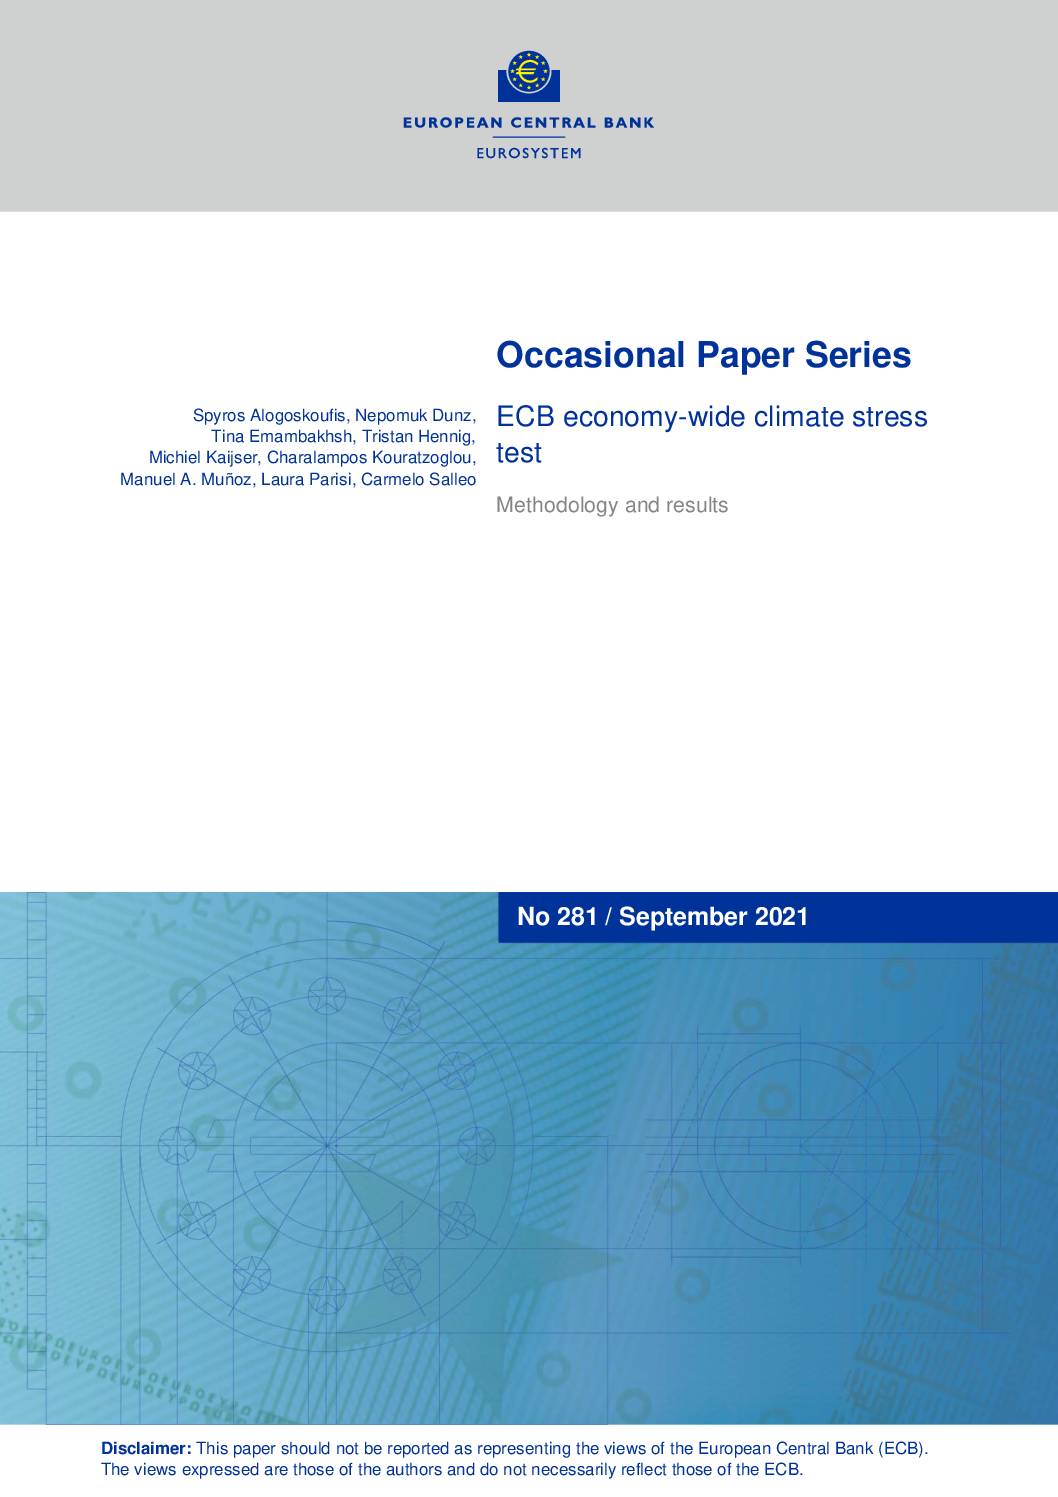 Occasional Paper Series: ECB Economy-Wide Climate Stress Test. Methodology and Results